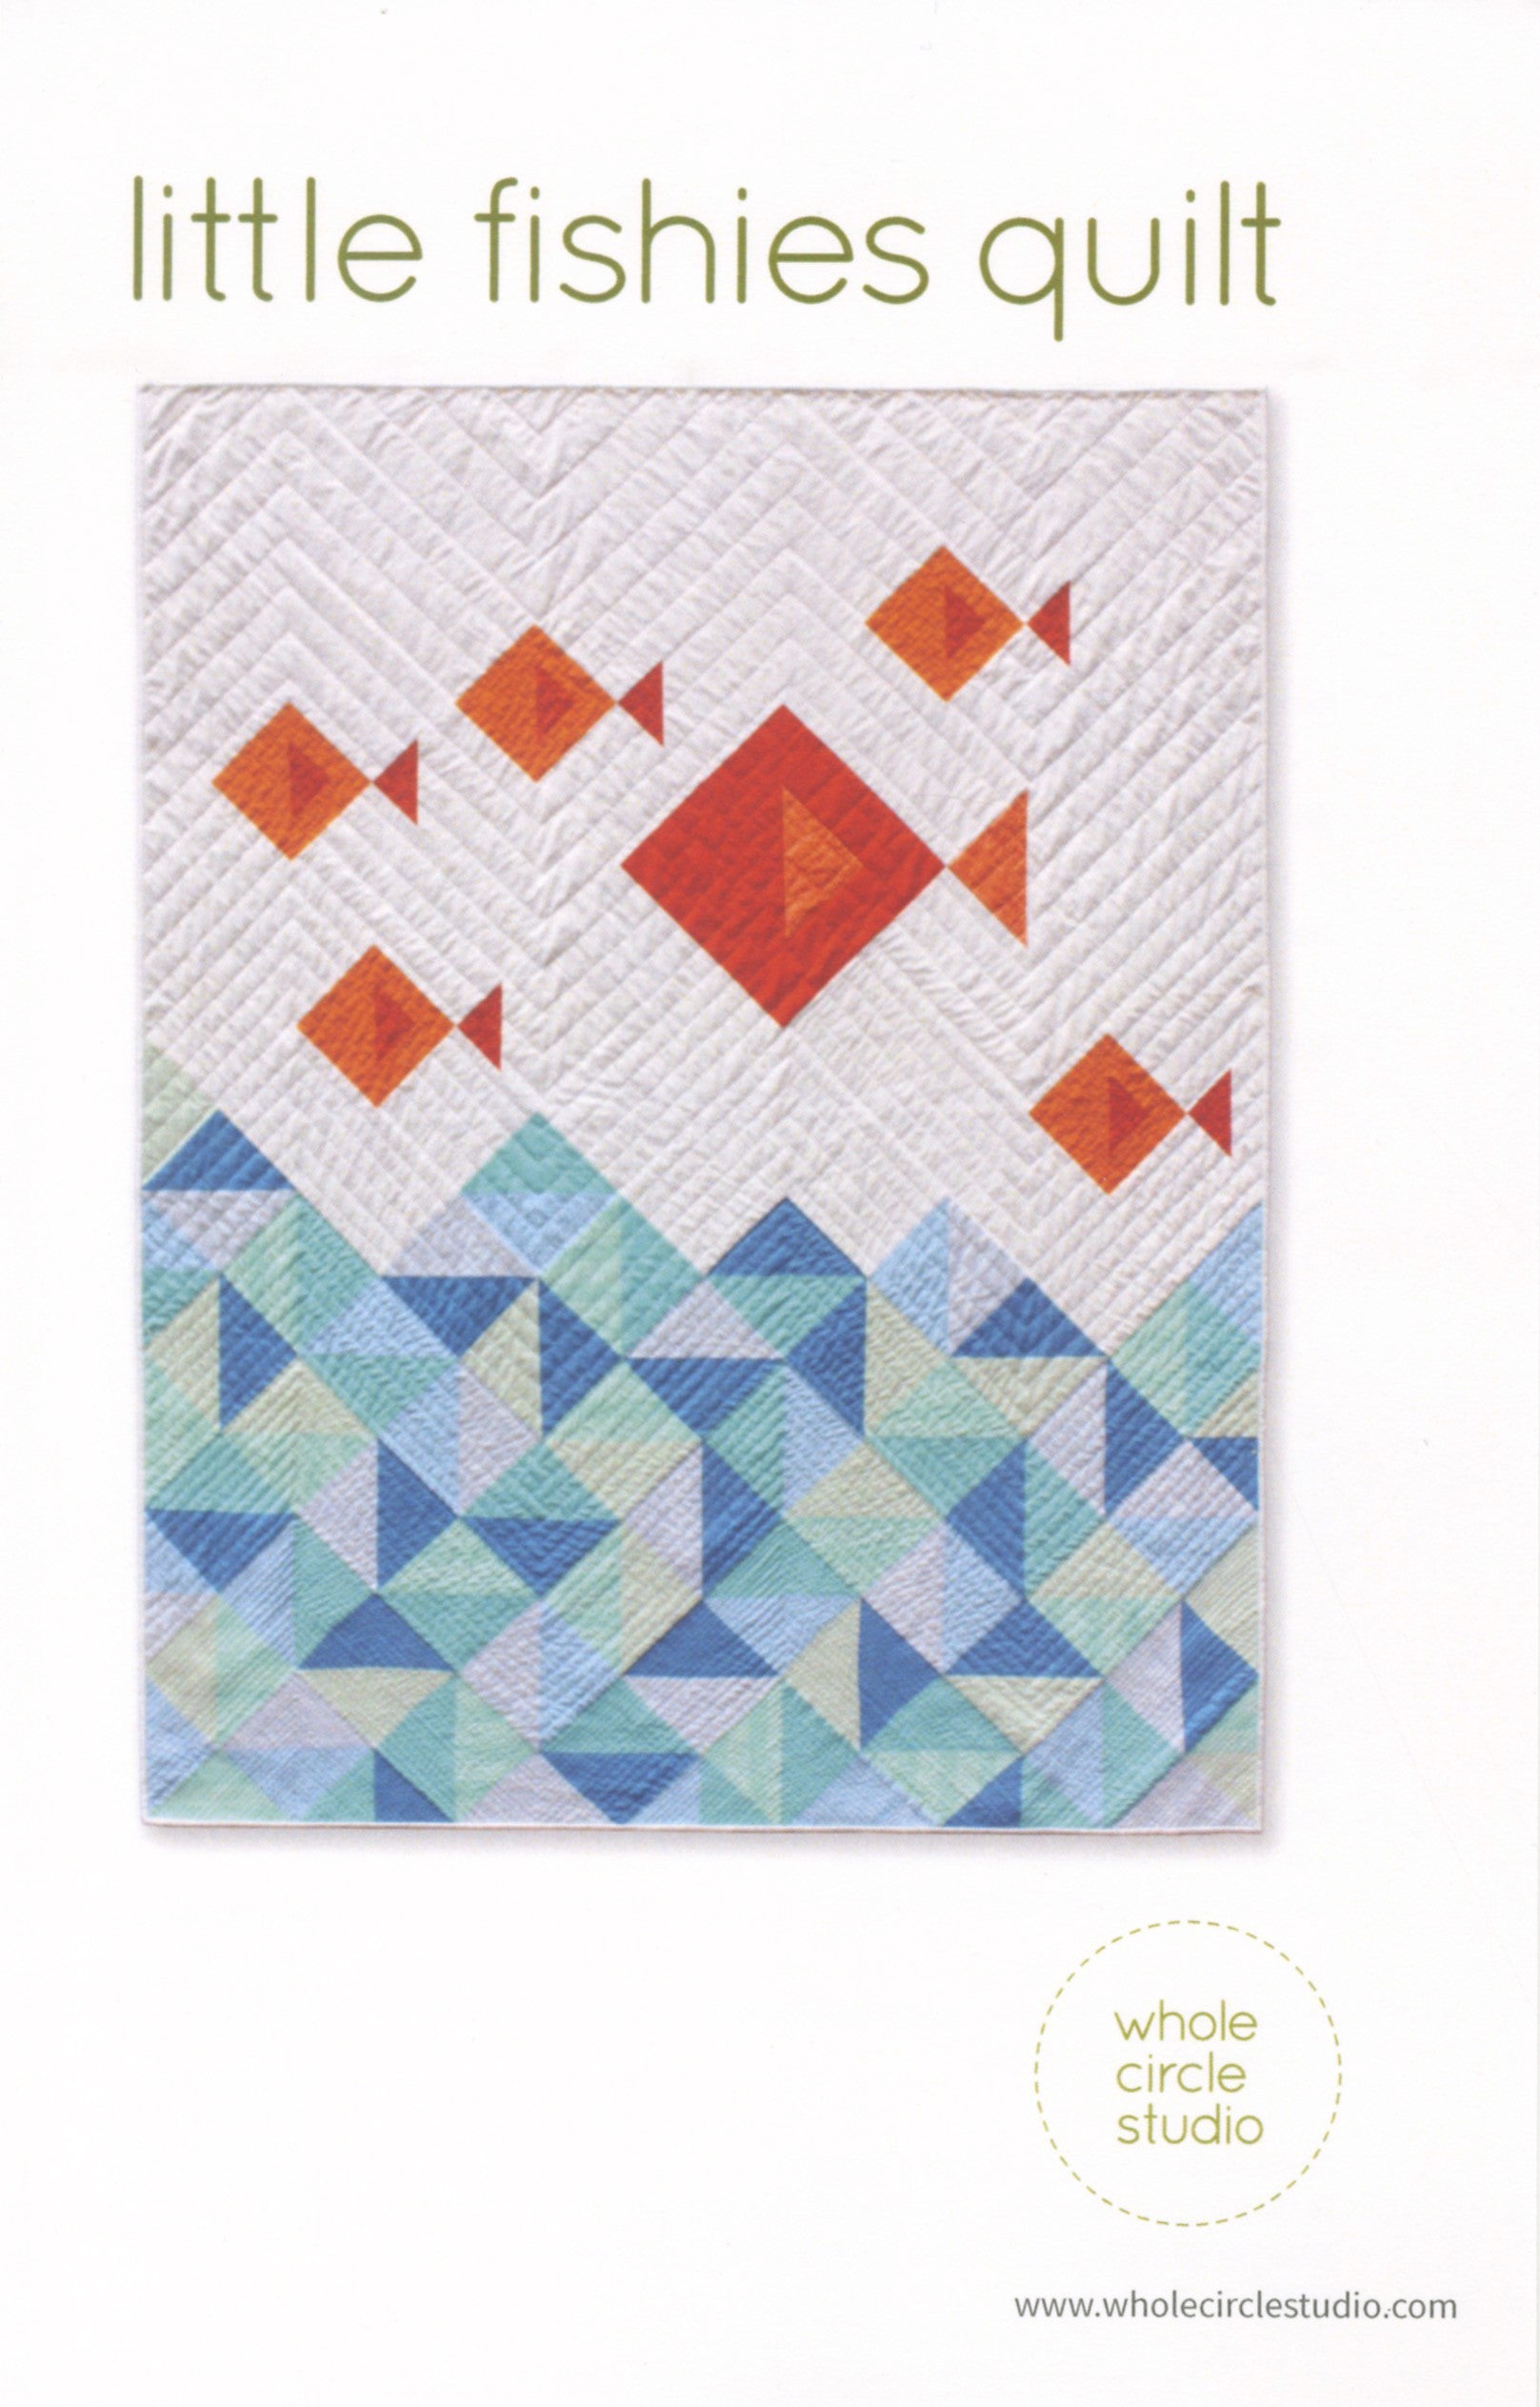 Little Fishies Quilt Pattern by Sheri Cifaldi-Morrill for Whole Circle Studio